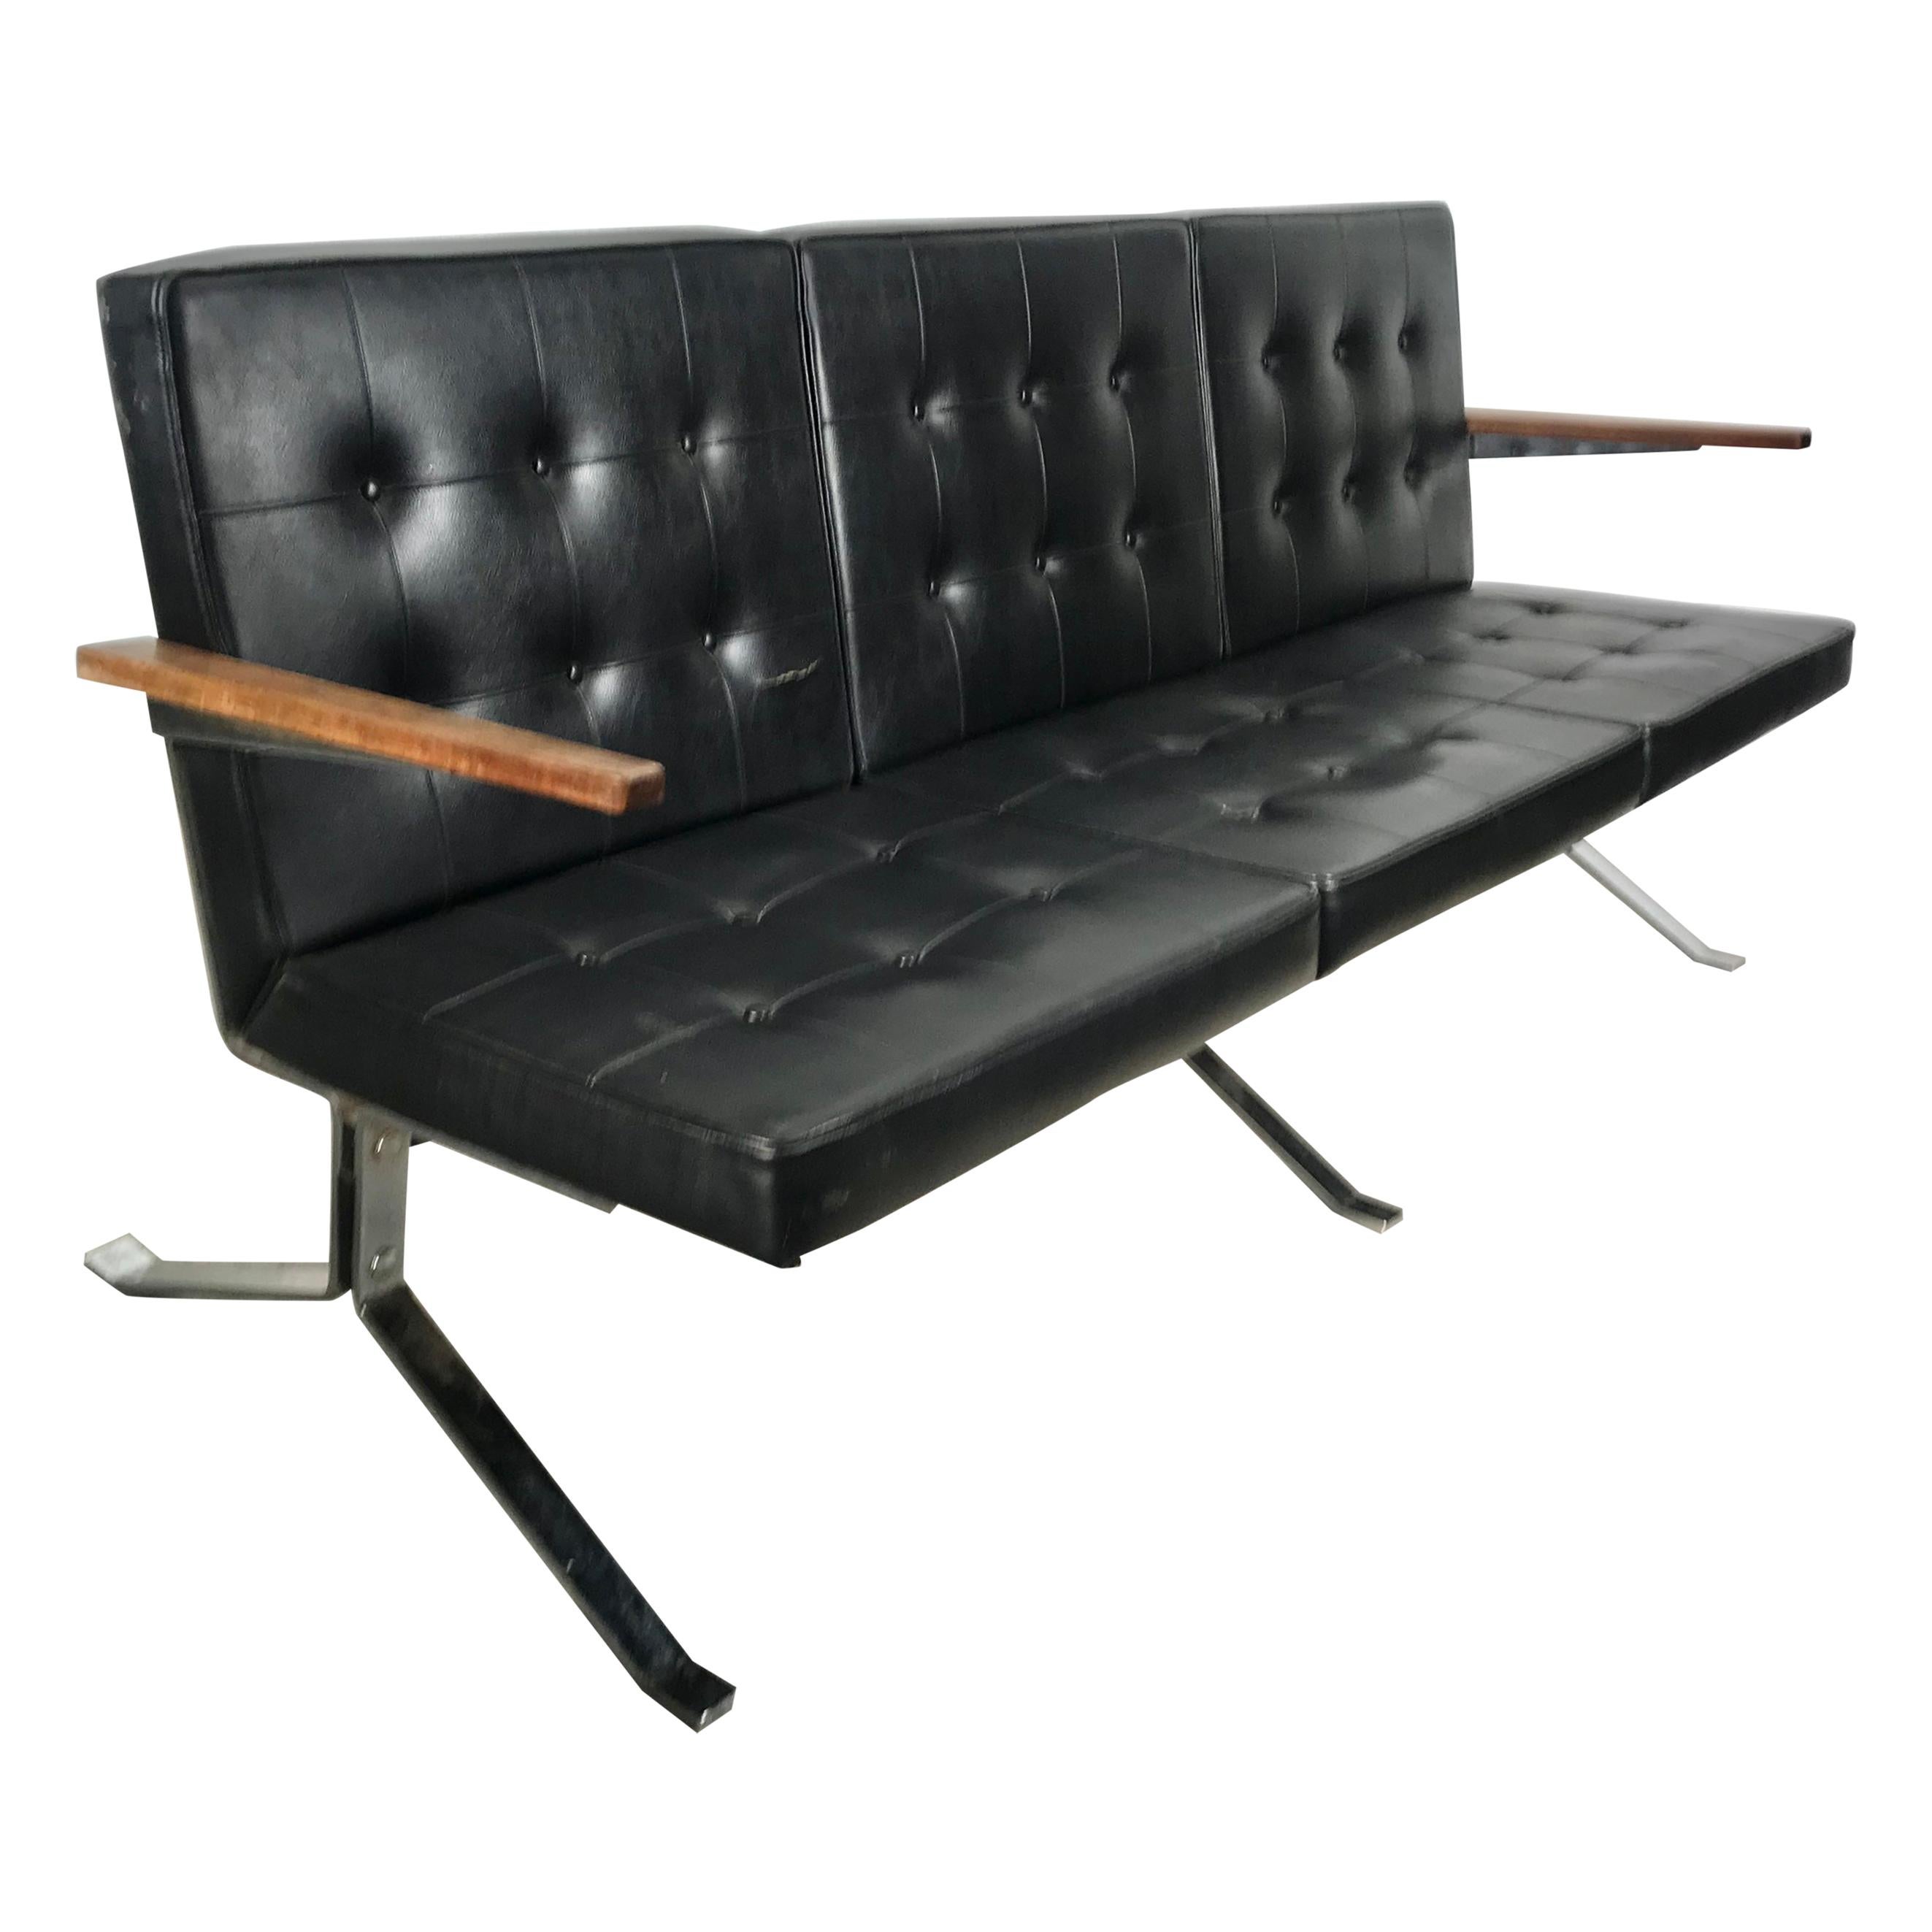 Classic 1960s Modernist Black and Chrome Bench Sette', after Arne Norell For Sale